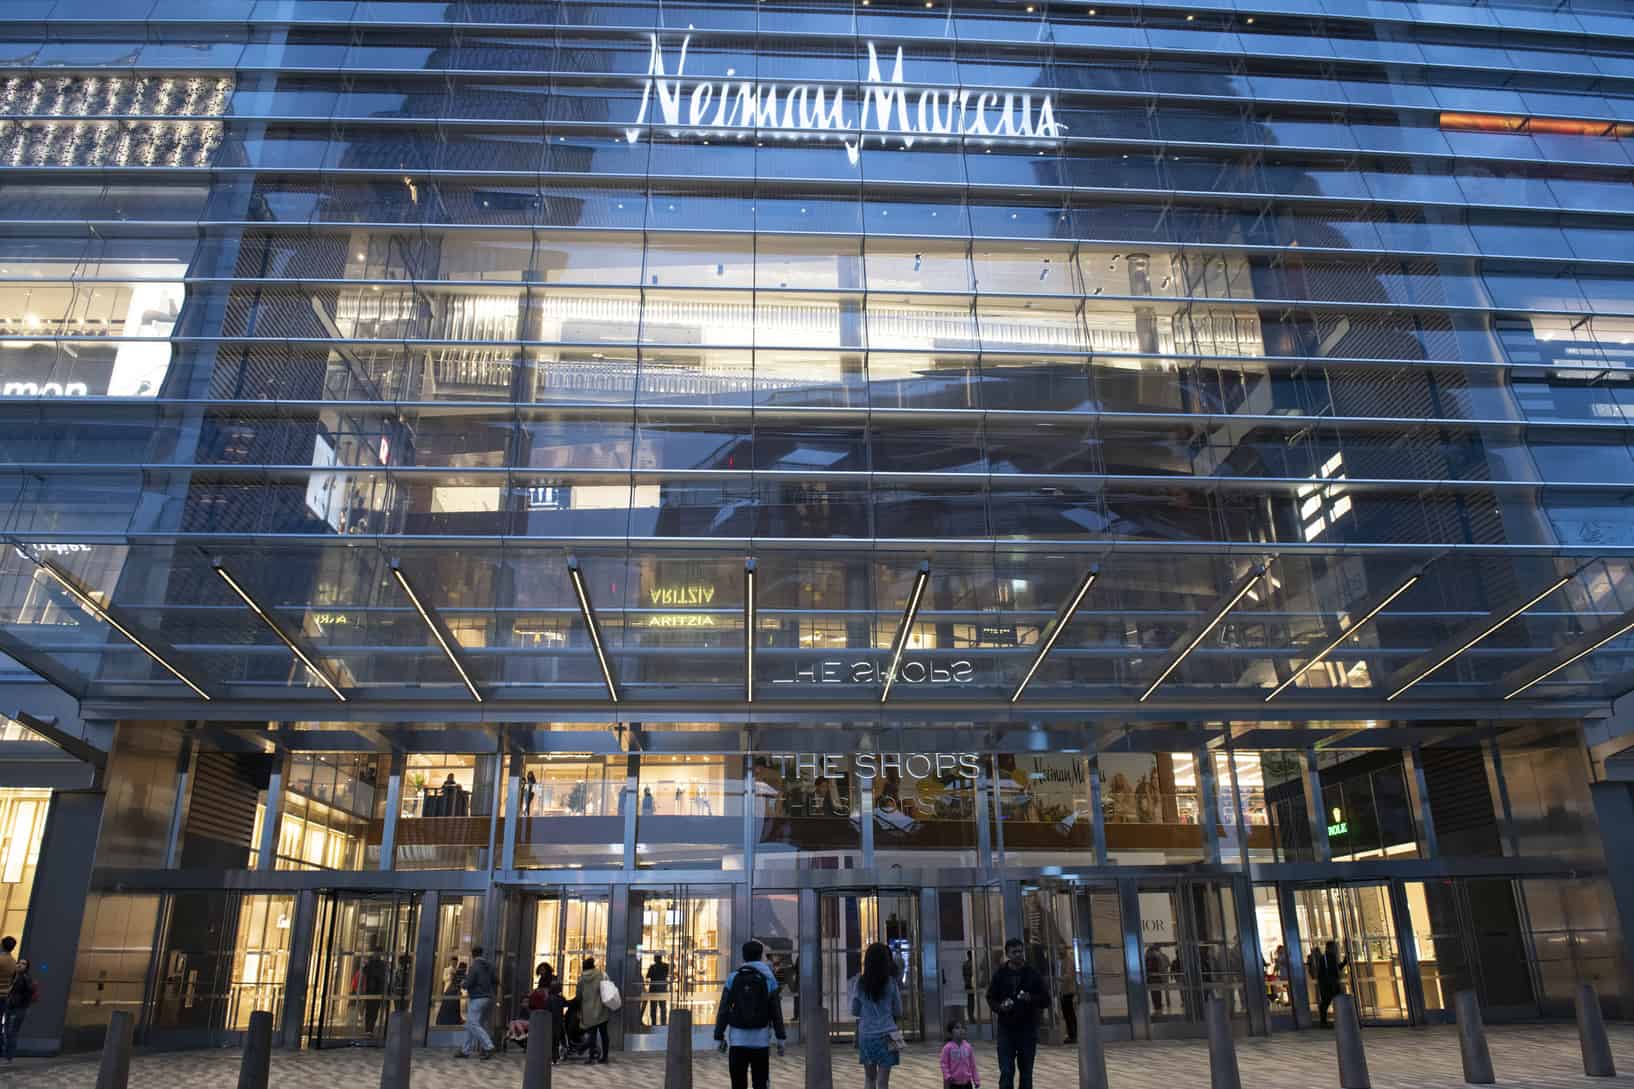 Too many negatives at the moment': Hudson Yards has few good options to  fill Neiman Marcus' now-vacant storefront - Modern Retail